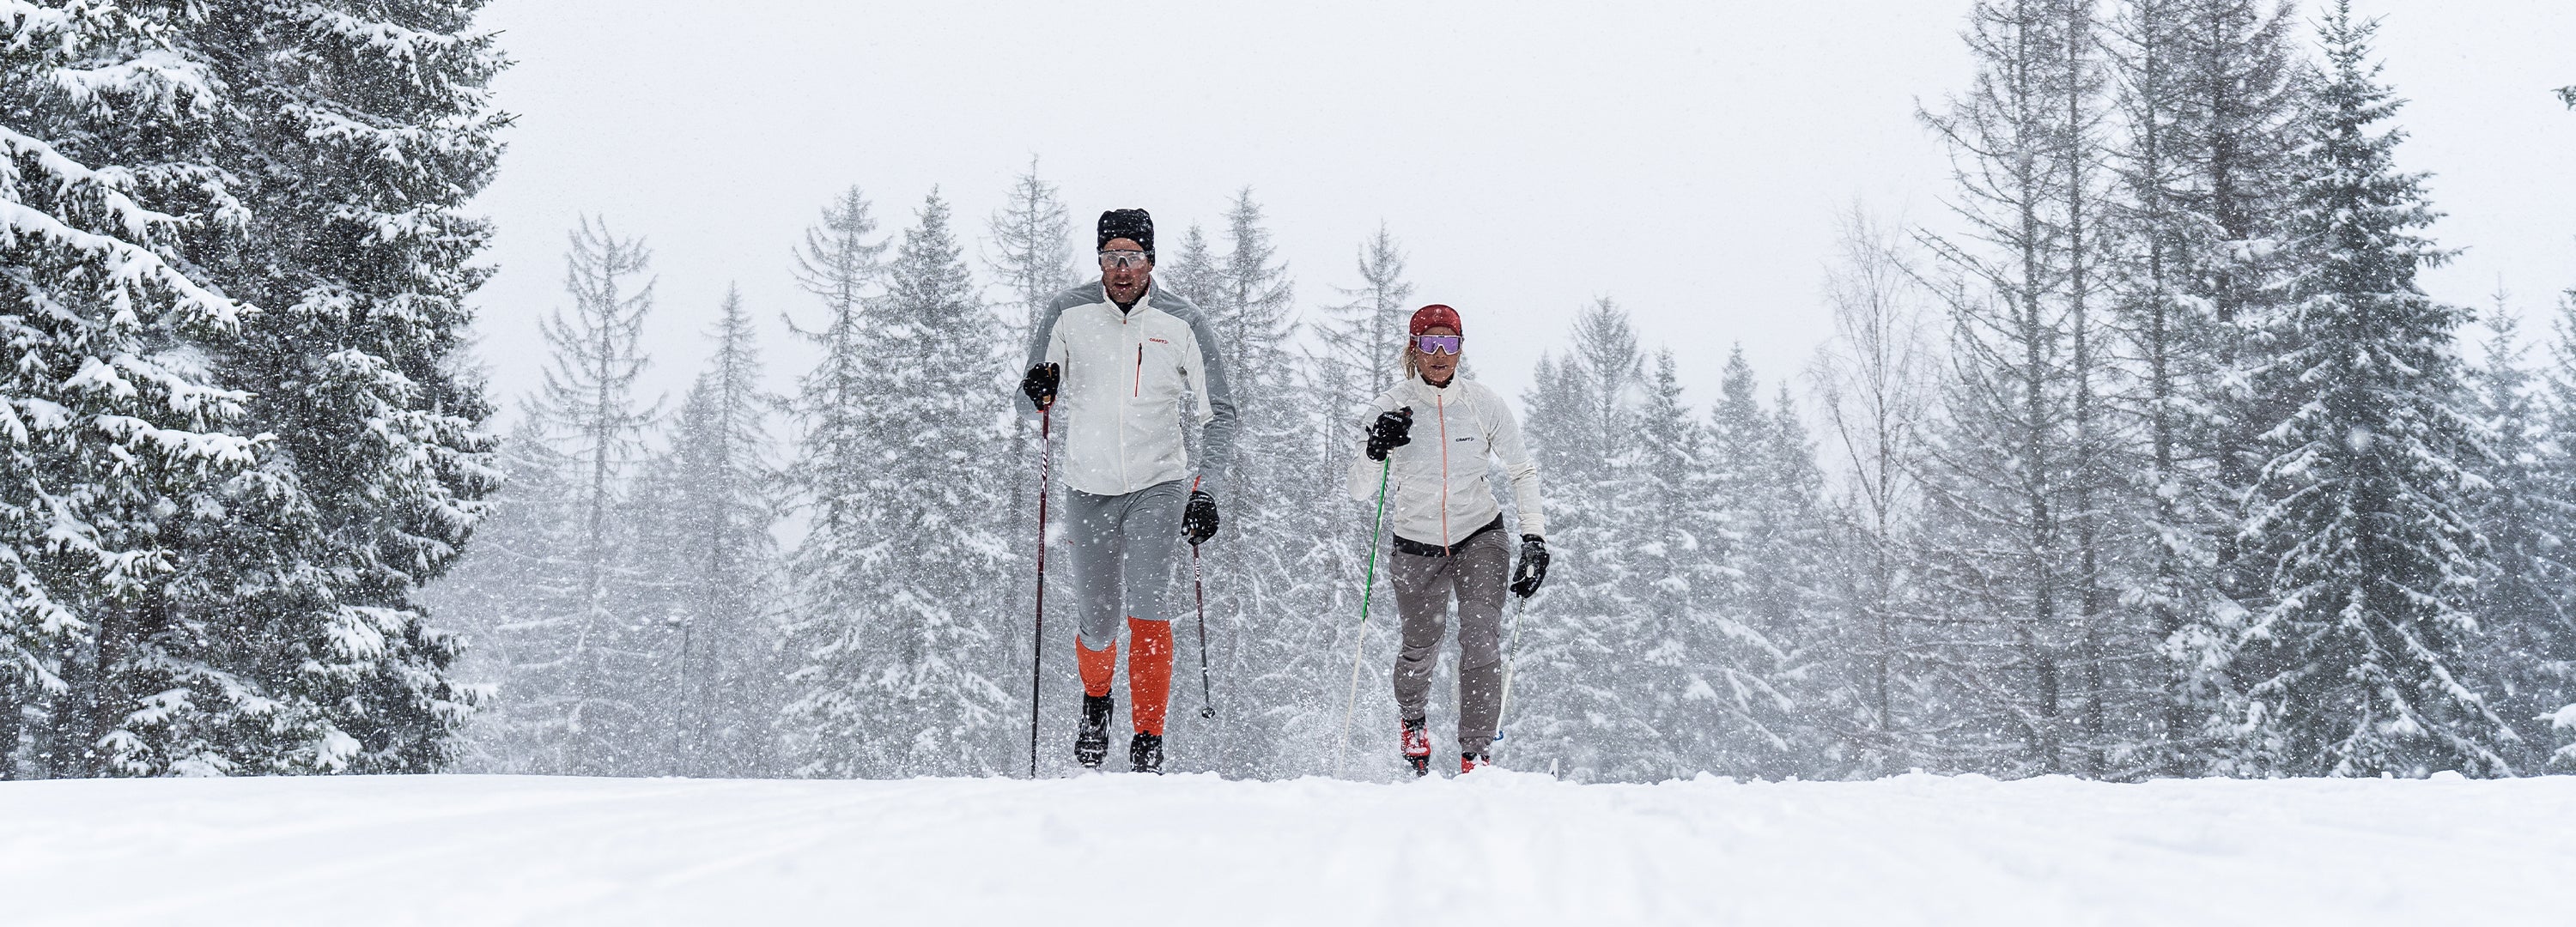 Warm thermal tights for men, women and children's cross-country skiing.